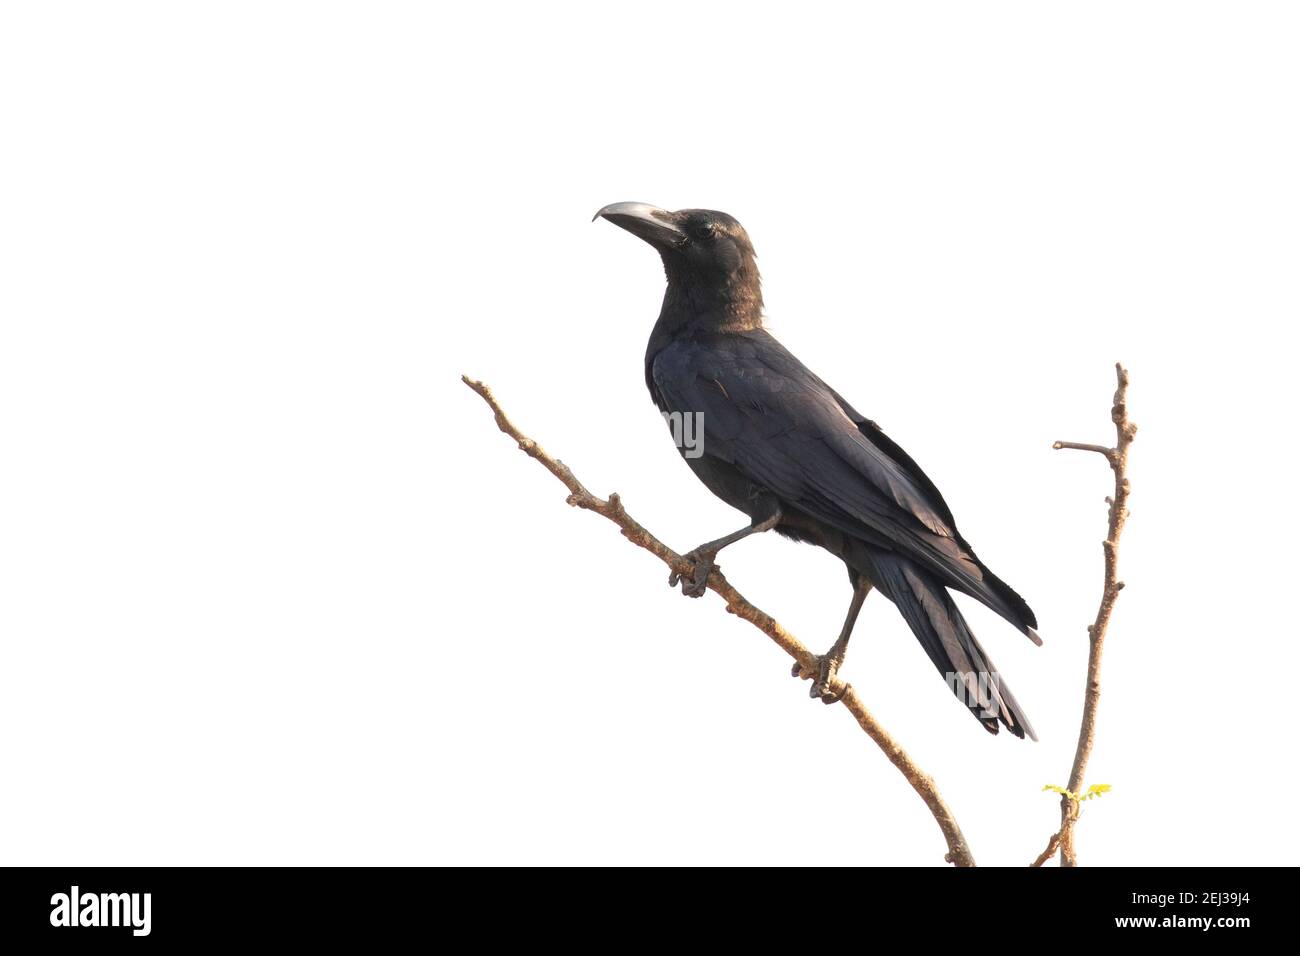 Image of crows on a branch isolated on white background. Birds. Wild Animals. Stock Photo